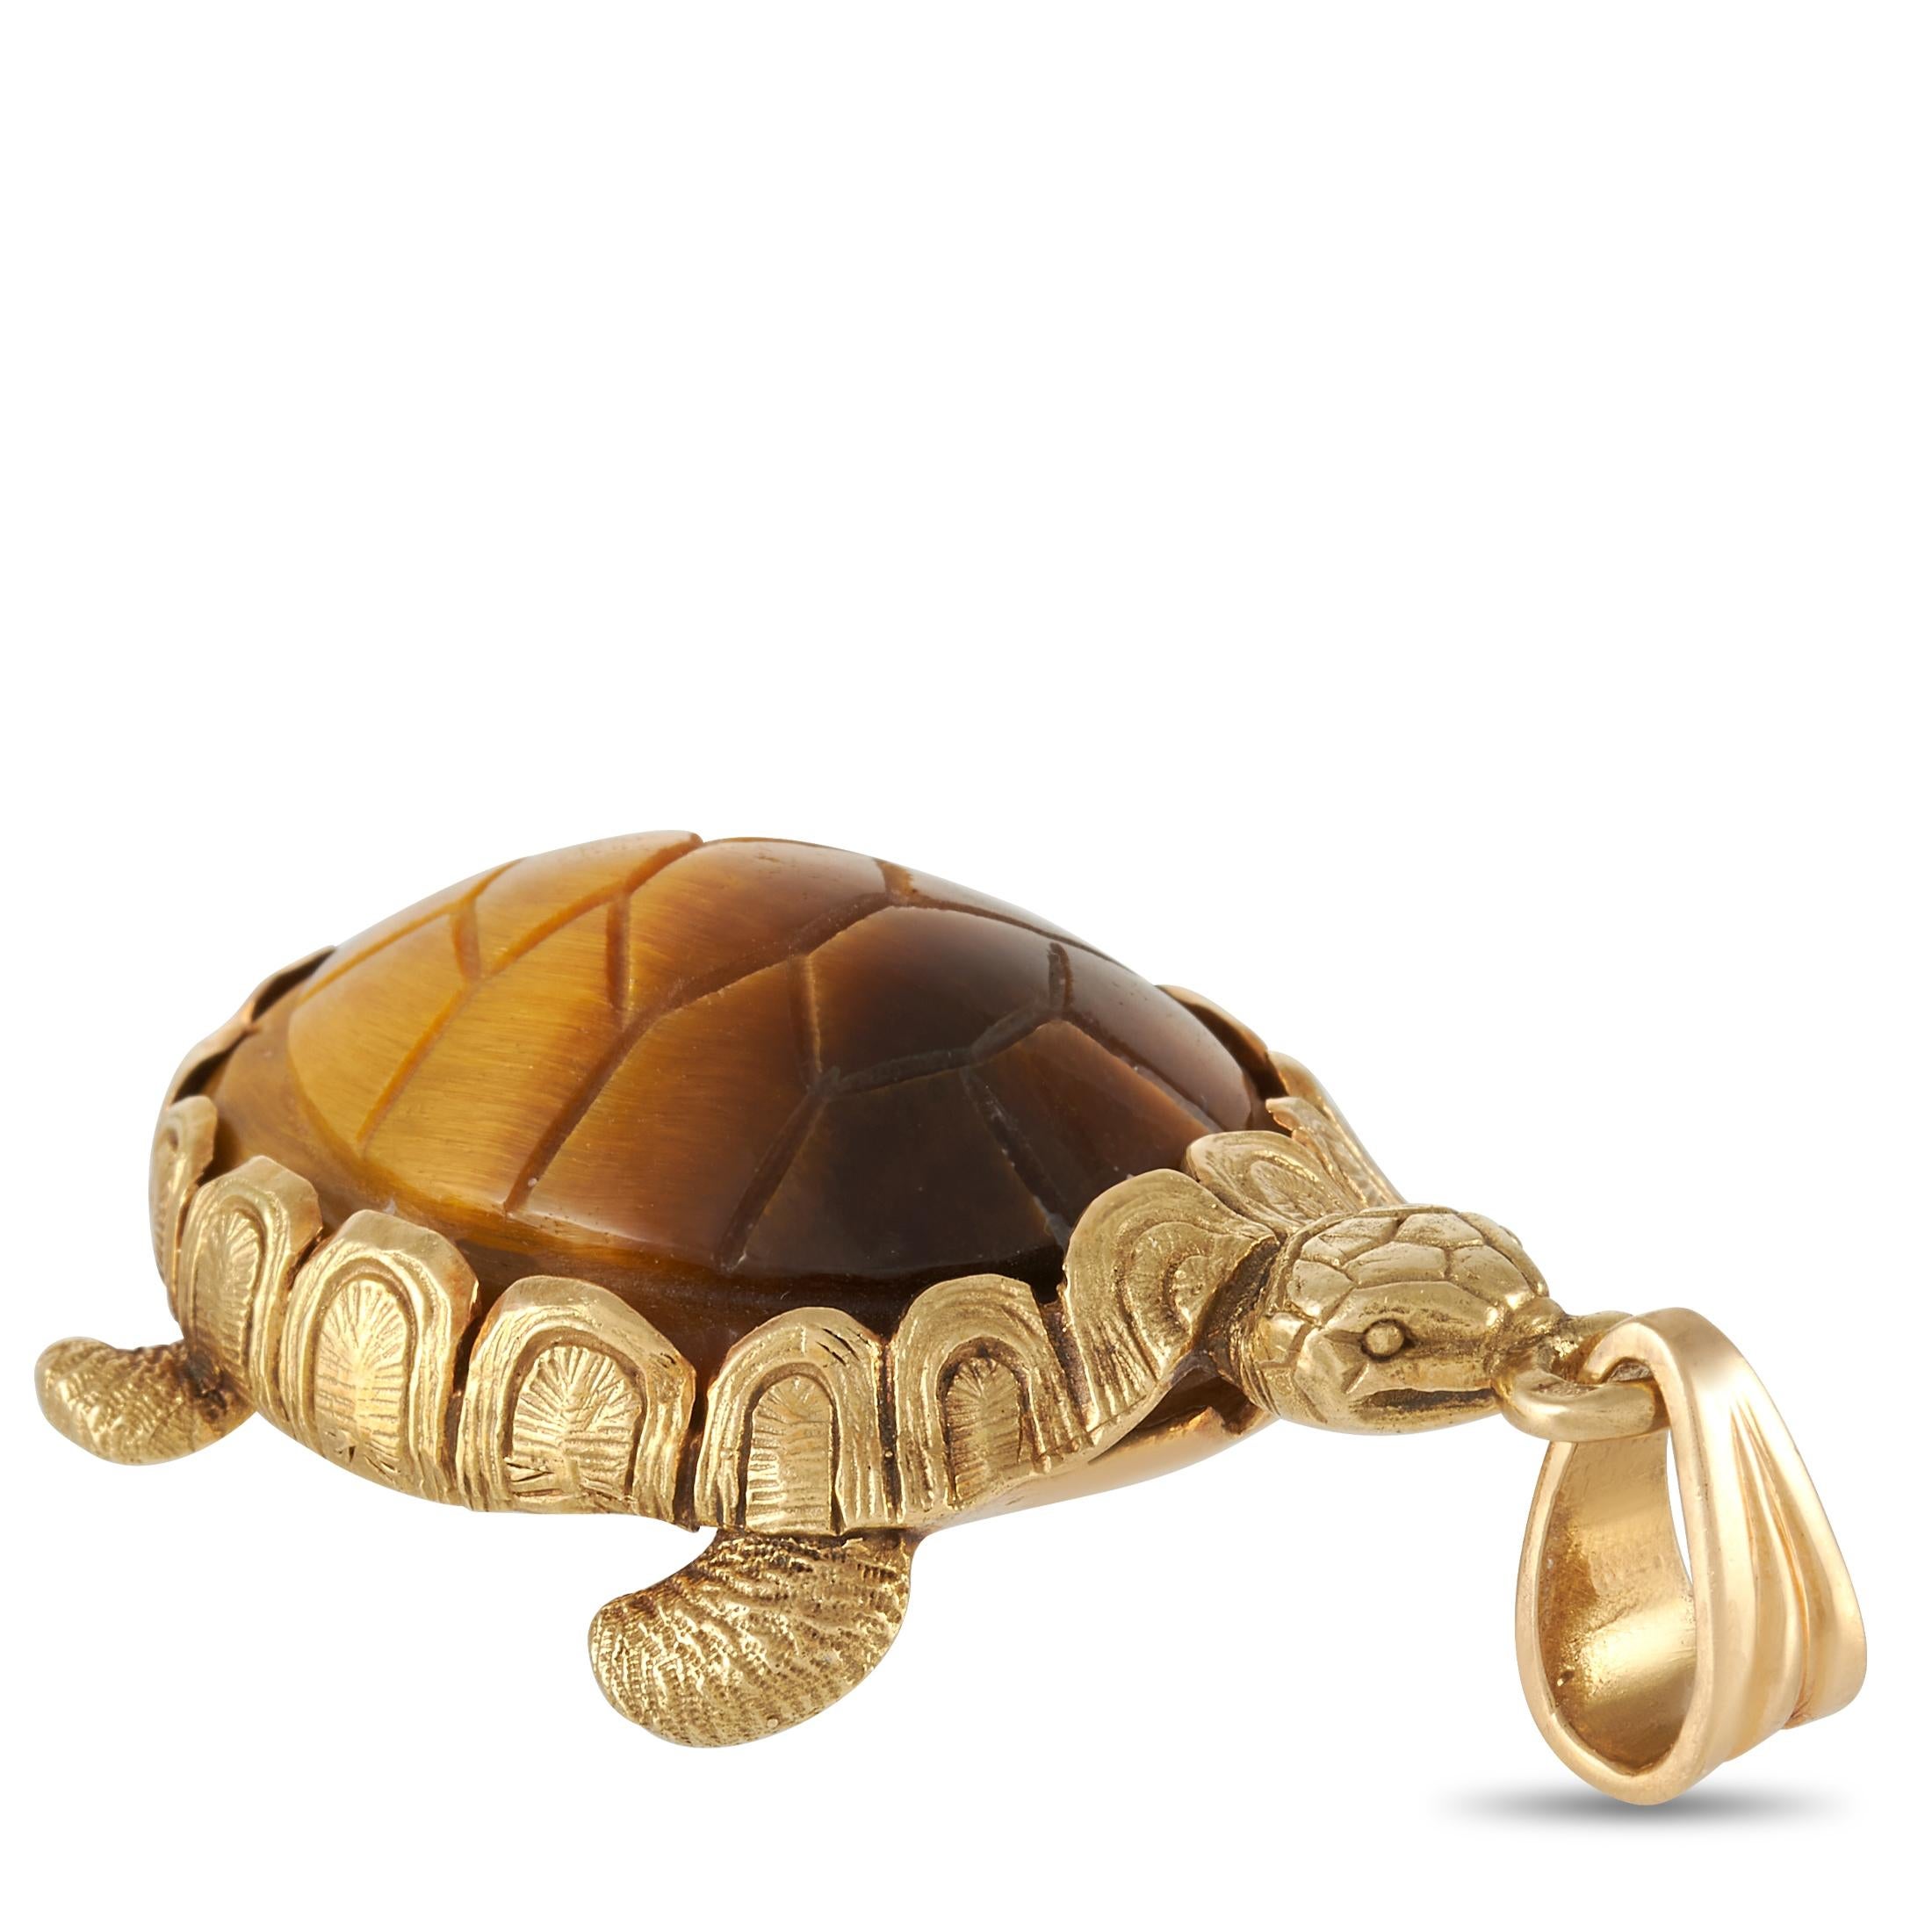 This cool vintage 18K Yellow Gold Hermes Tiger's Eye Turtle Pendant by Hermès is elegant and fun. The turtle pendant is beautifully crafted and detailed out of 18K yellow gold with a carved tigers eye shell. The pendant measures 2 inches in length